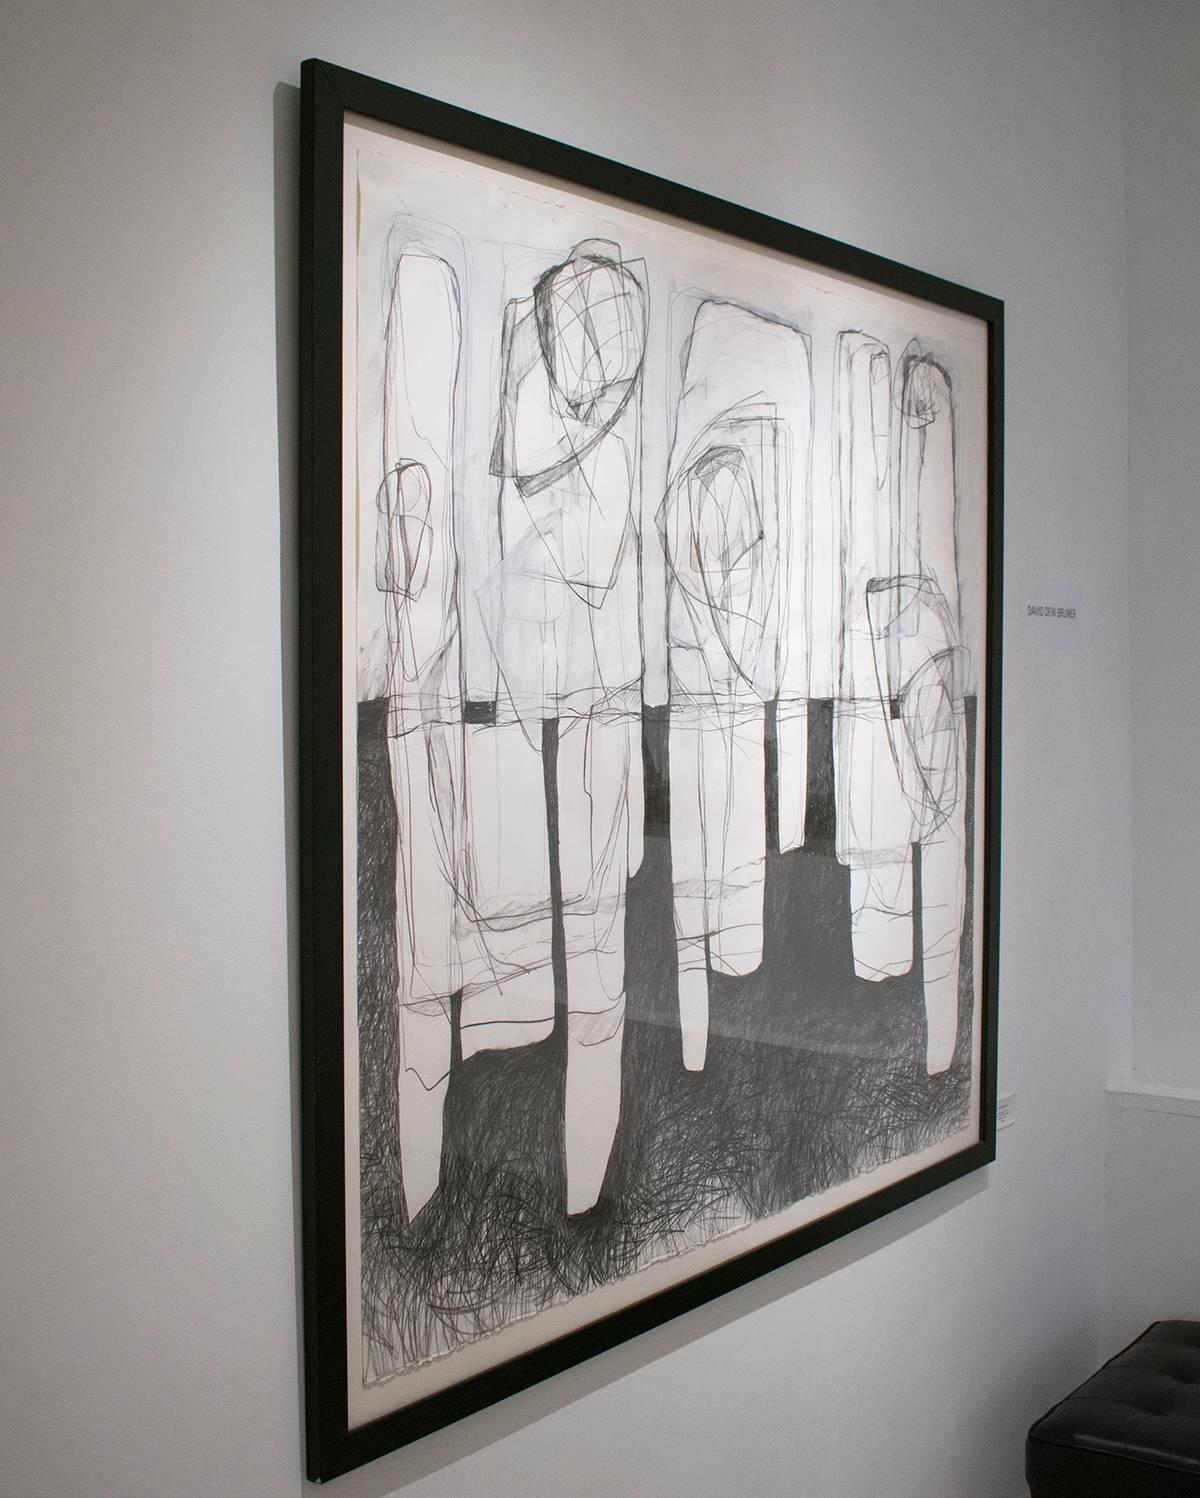 Three Figures (Black & White Abstract Graphite Drawing in Contemporary Frame) - Art by David Dew Bruner